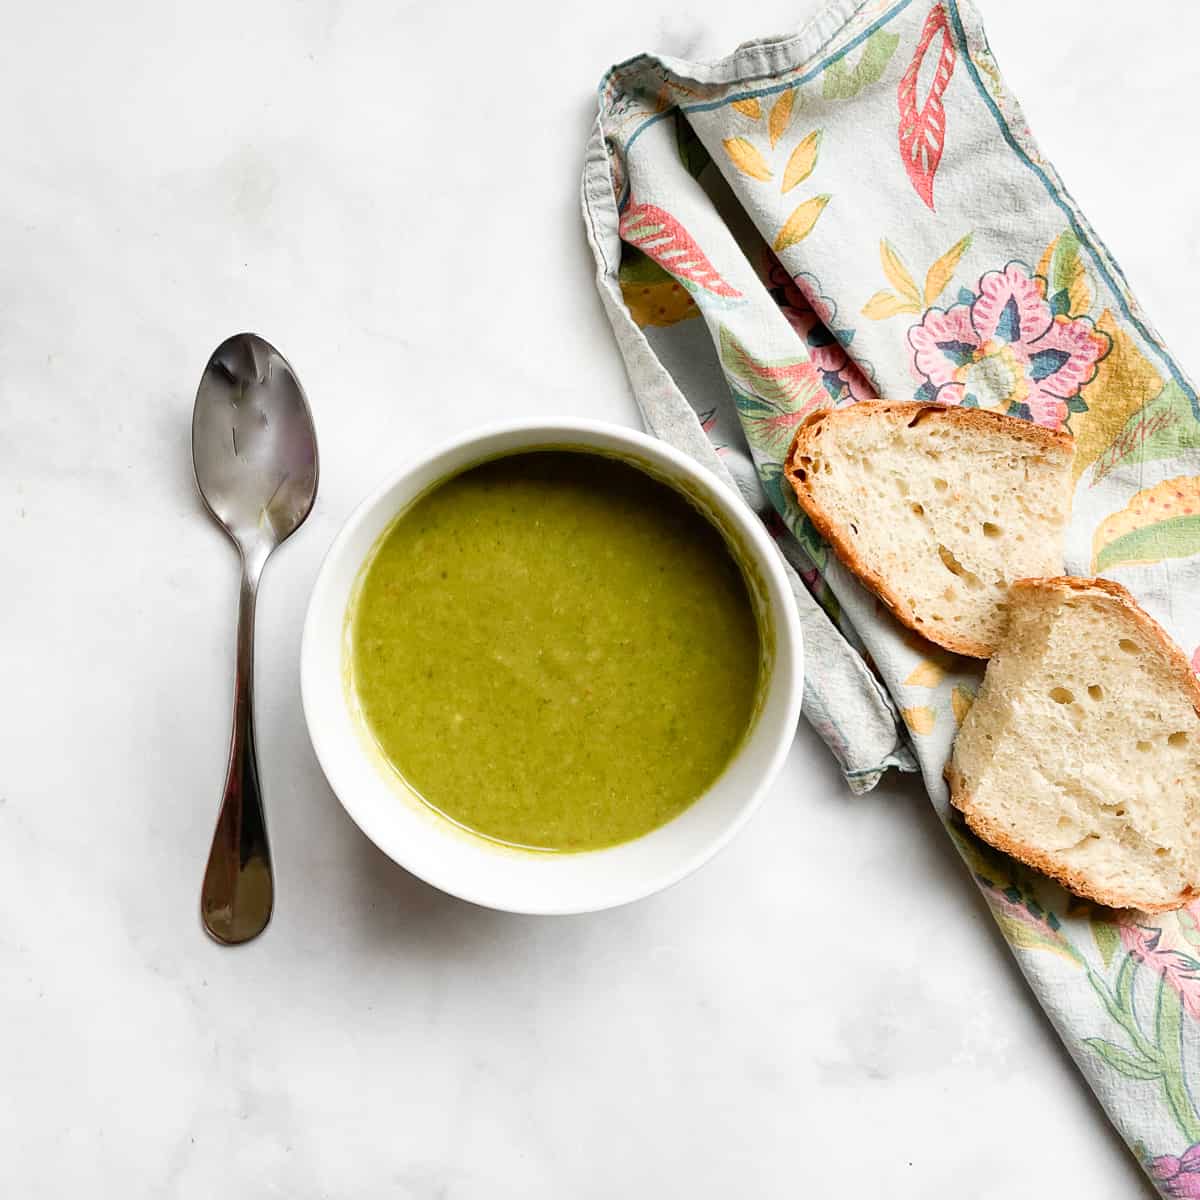 Two slices of bread on a napkin next to a bowl of vegan asparagus soup.